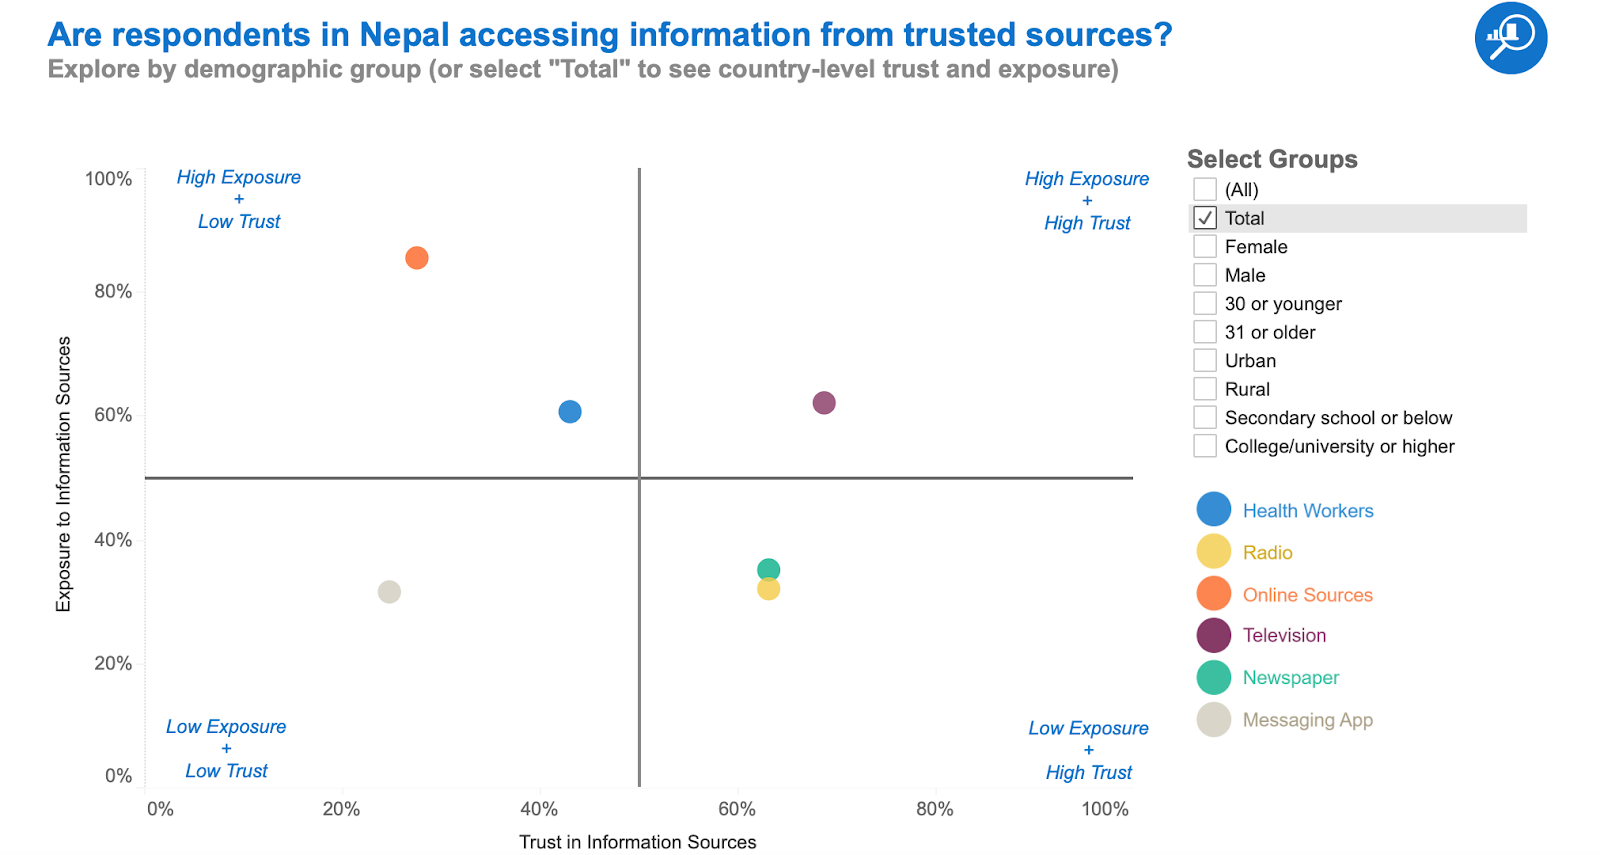 Are respondents in Nepal accessing information from trusted sources?